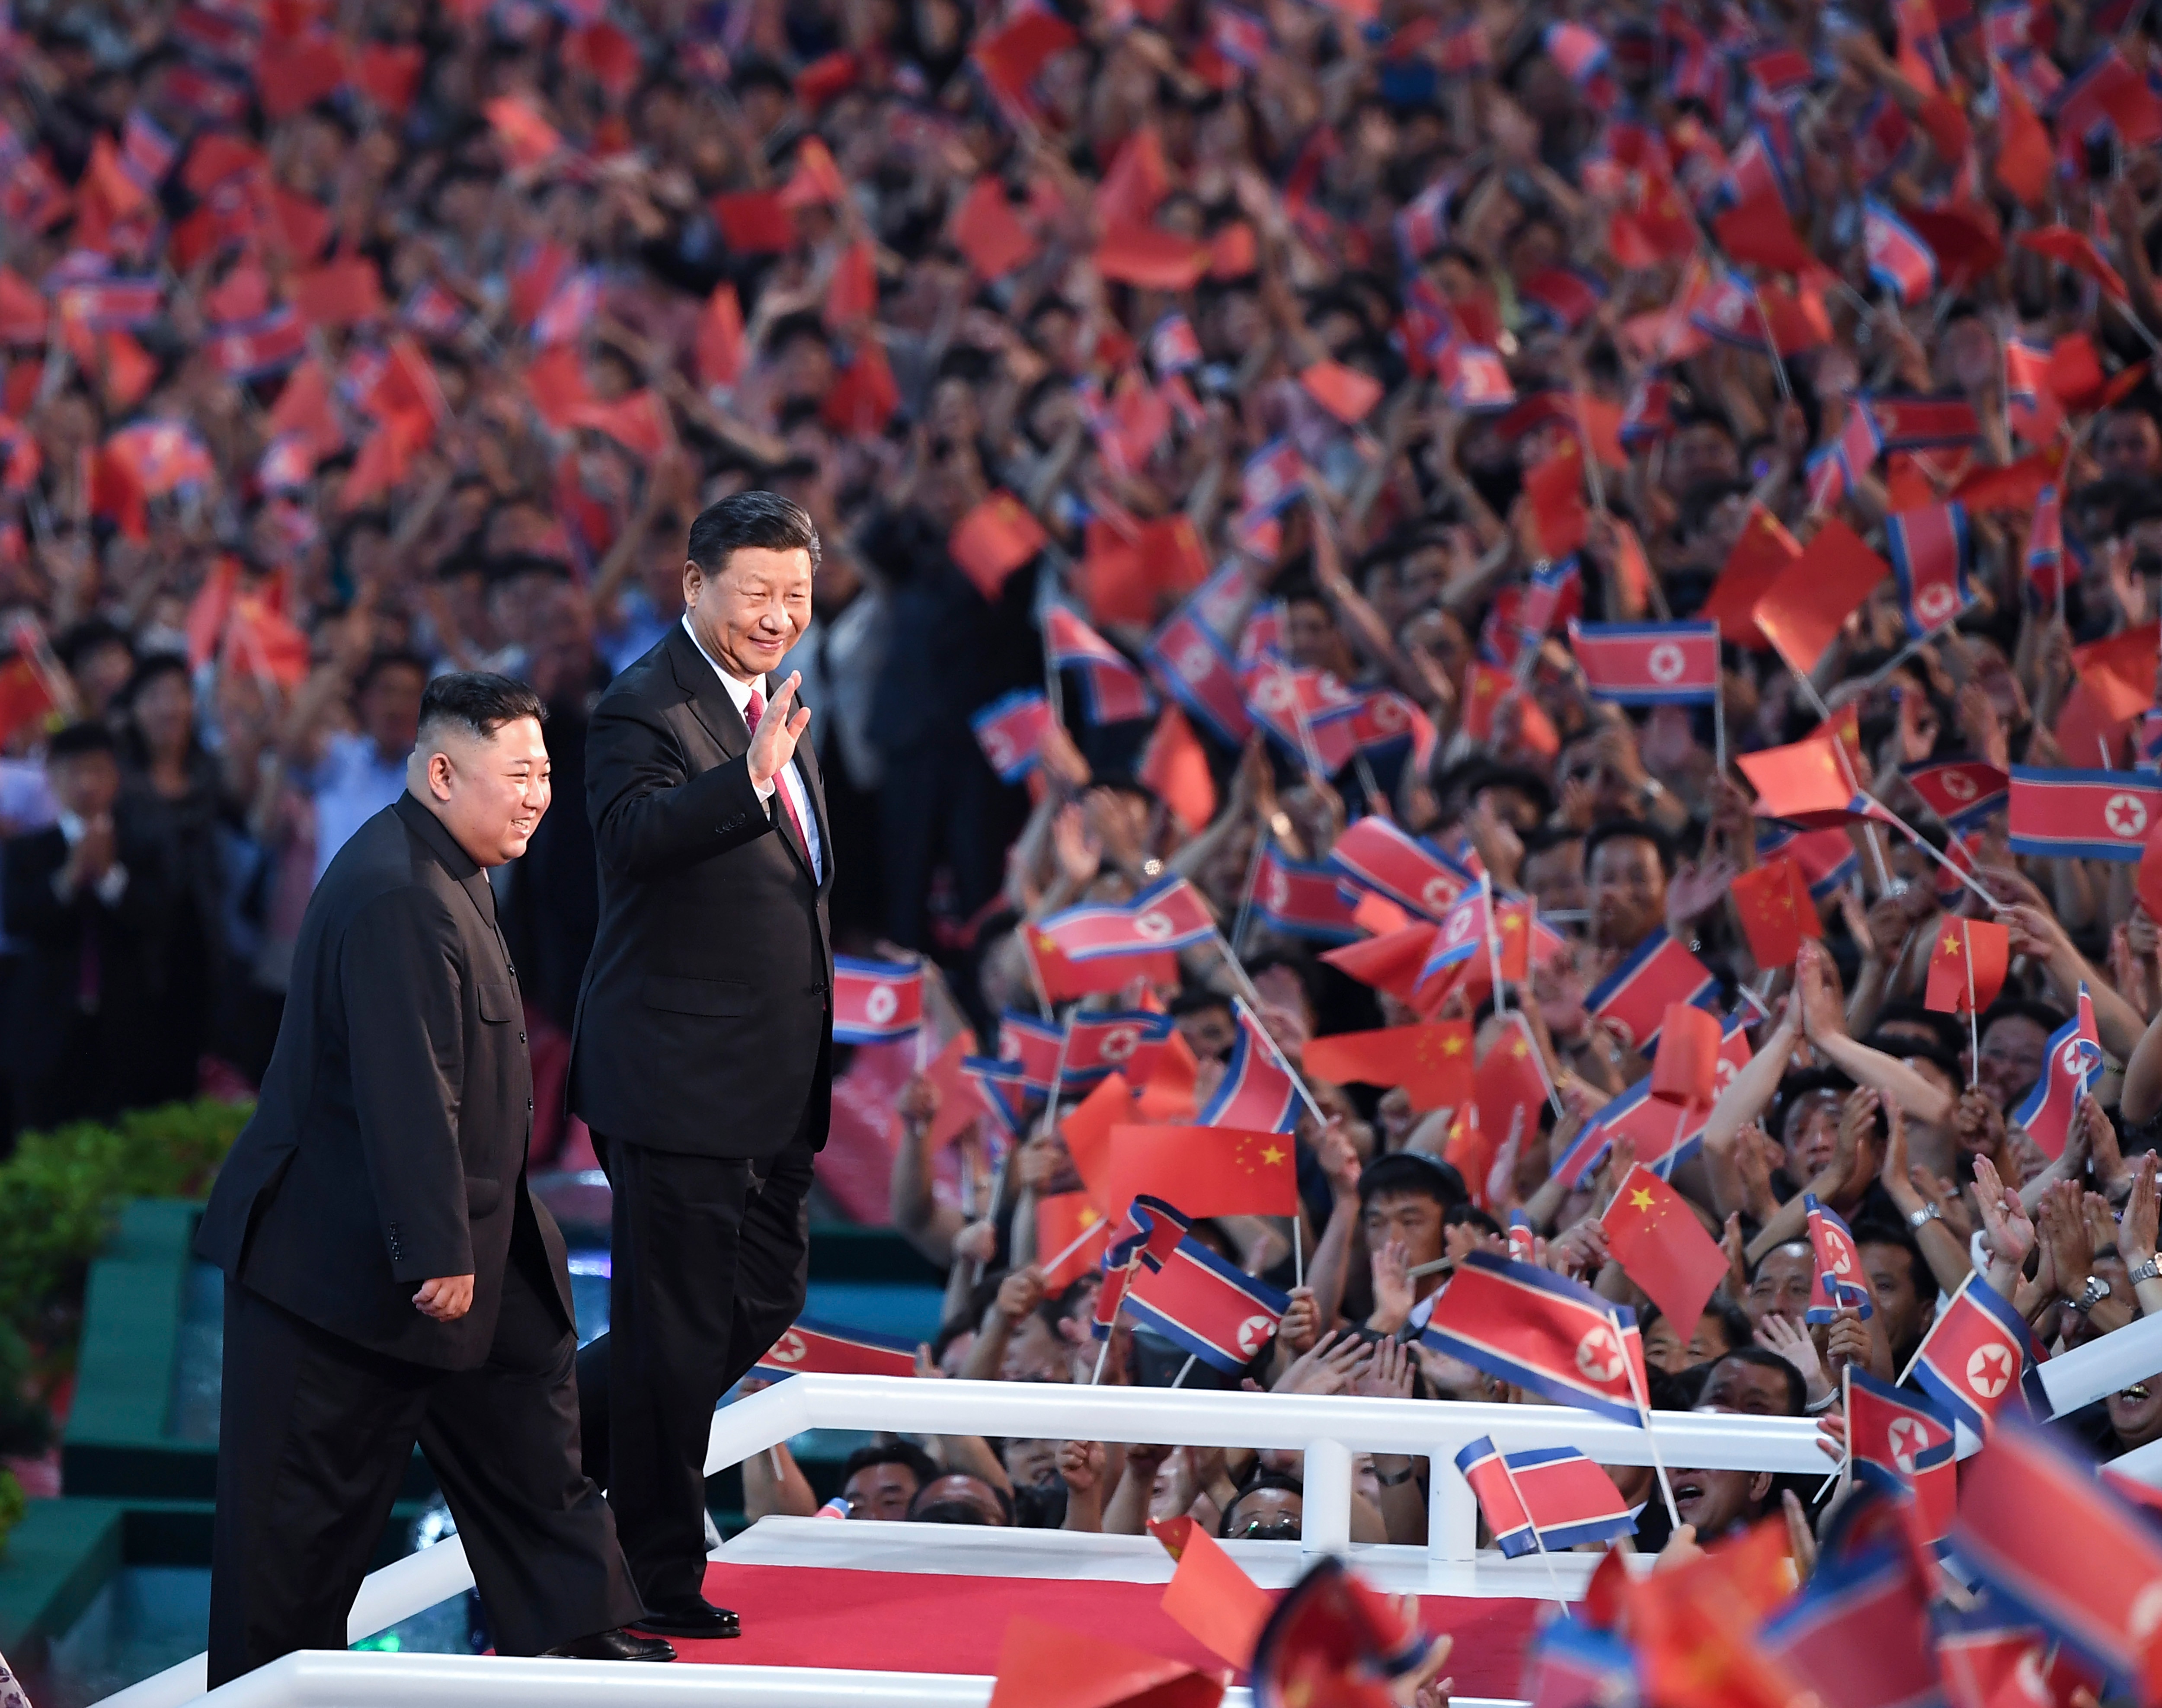 North Korean leader Kim Jong Un and visiting Chinese President Xi Jinping attend a mass gymnastic performance at the May Day Stadium in Pyongyang, North Korea.